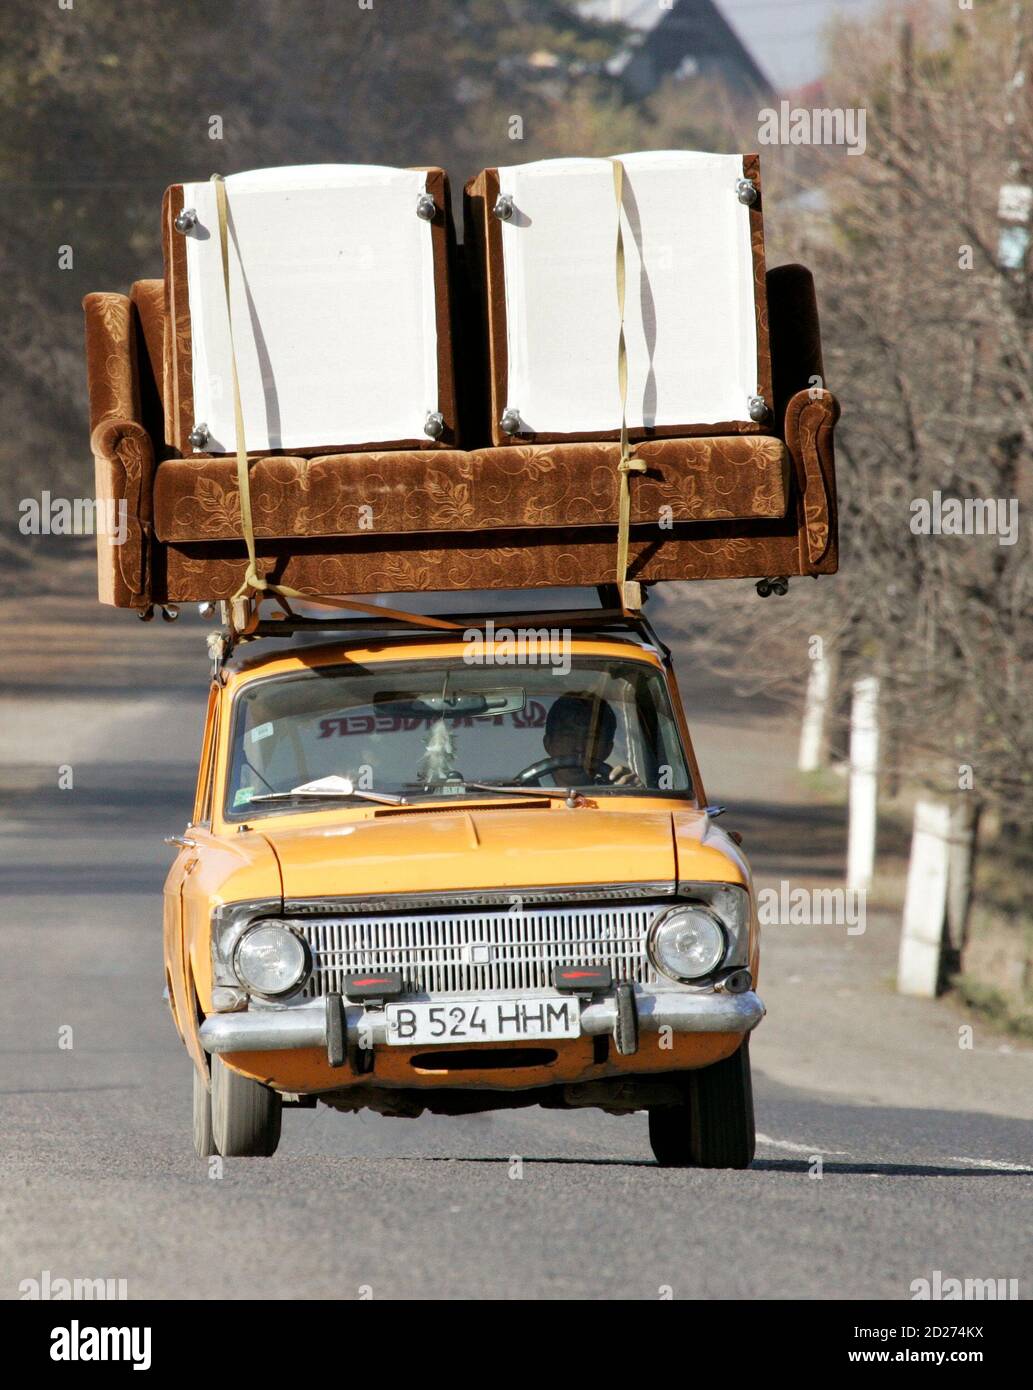 A man drives a car with a couch strapped to its roof on a road some 50 km (31 miles) east of Almaty, Kazakhstan, November 15, 2006. Many Kazakhs were upset by the British comedian Sacha Baron Cohen's film about the fictional TV journalist Borat, an anti-Semitic misogynist, who calls Kazakhstan his home. In an interview with Rolling Stone magazine released on Wednesday, Baron Cohen, 35, said he was surprised the film had caused such offence in Kazakhstan or that its humour had been so misinterpreted.  Picture taken November 15, 2006.  REUTERS/Shamil Zhumatov (KAZAKHSTAN) Stock Photo